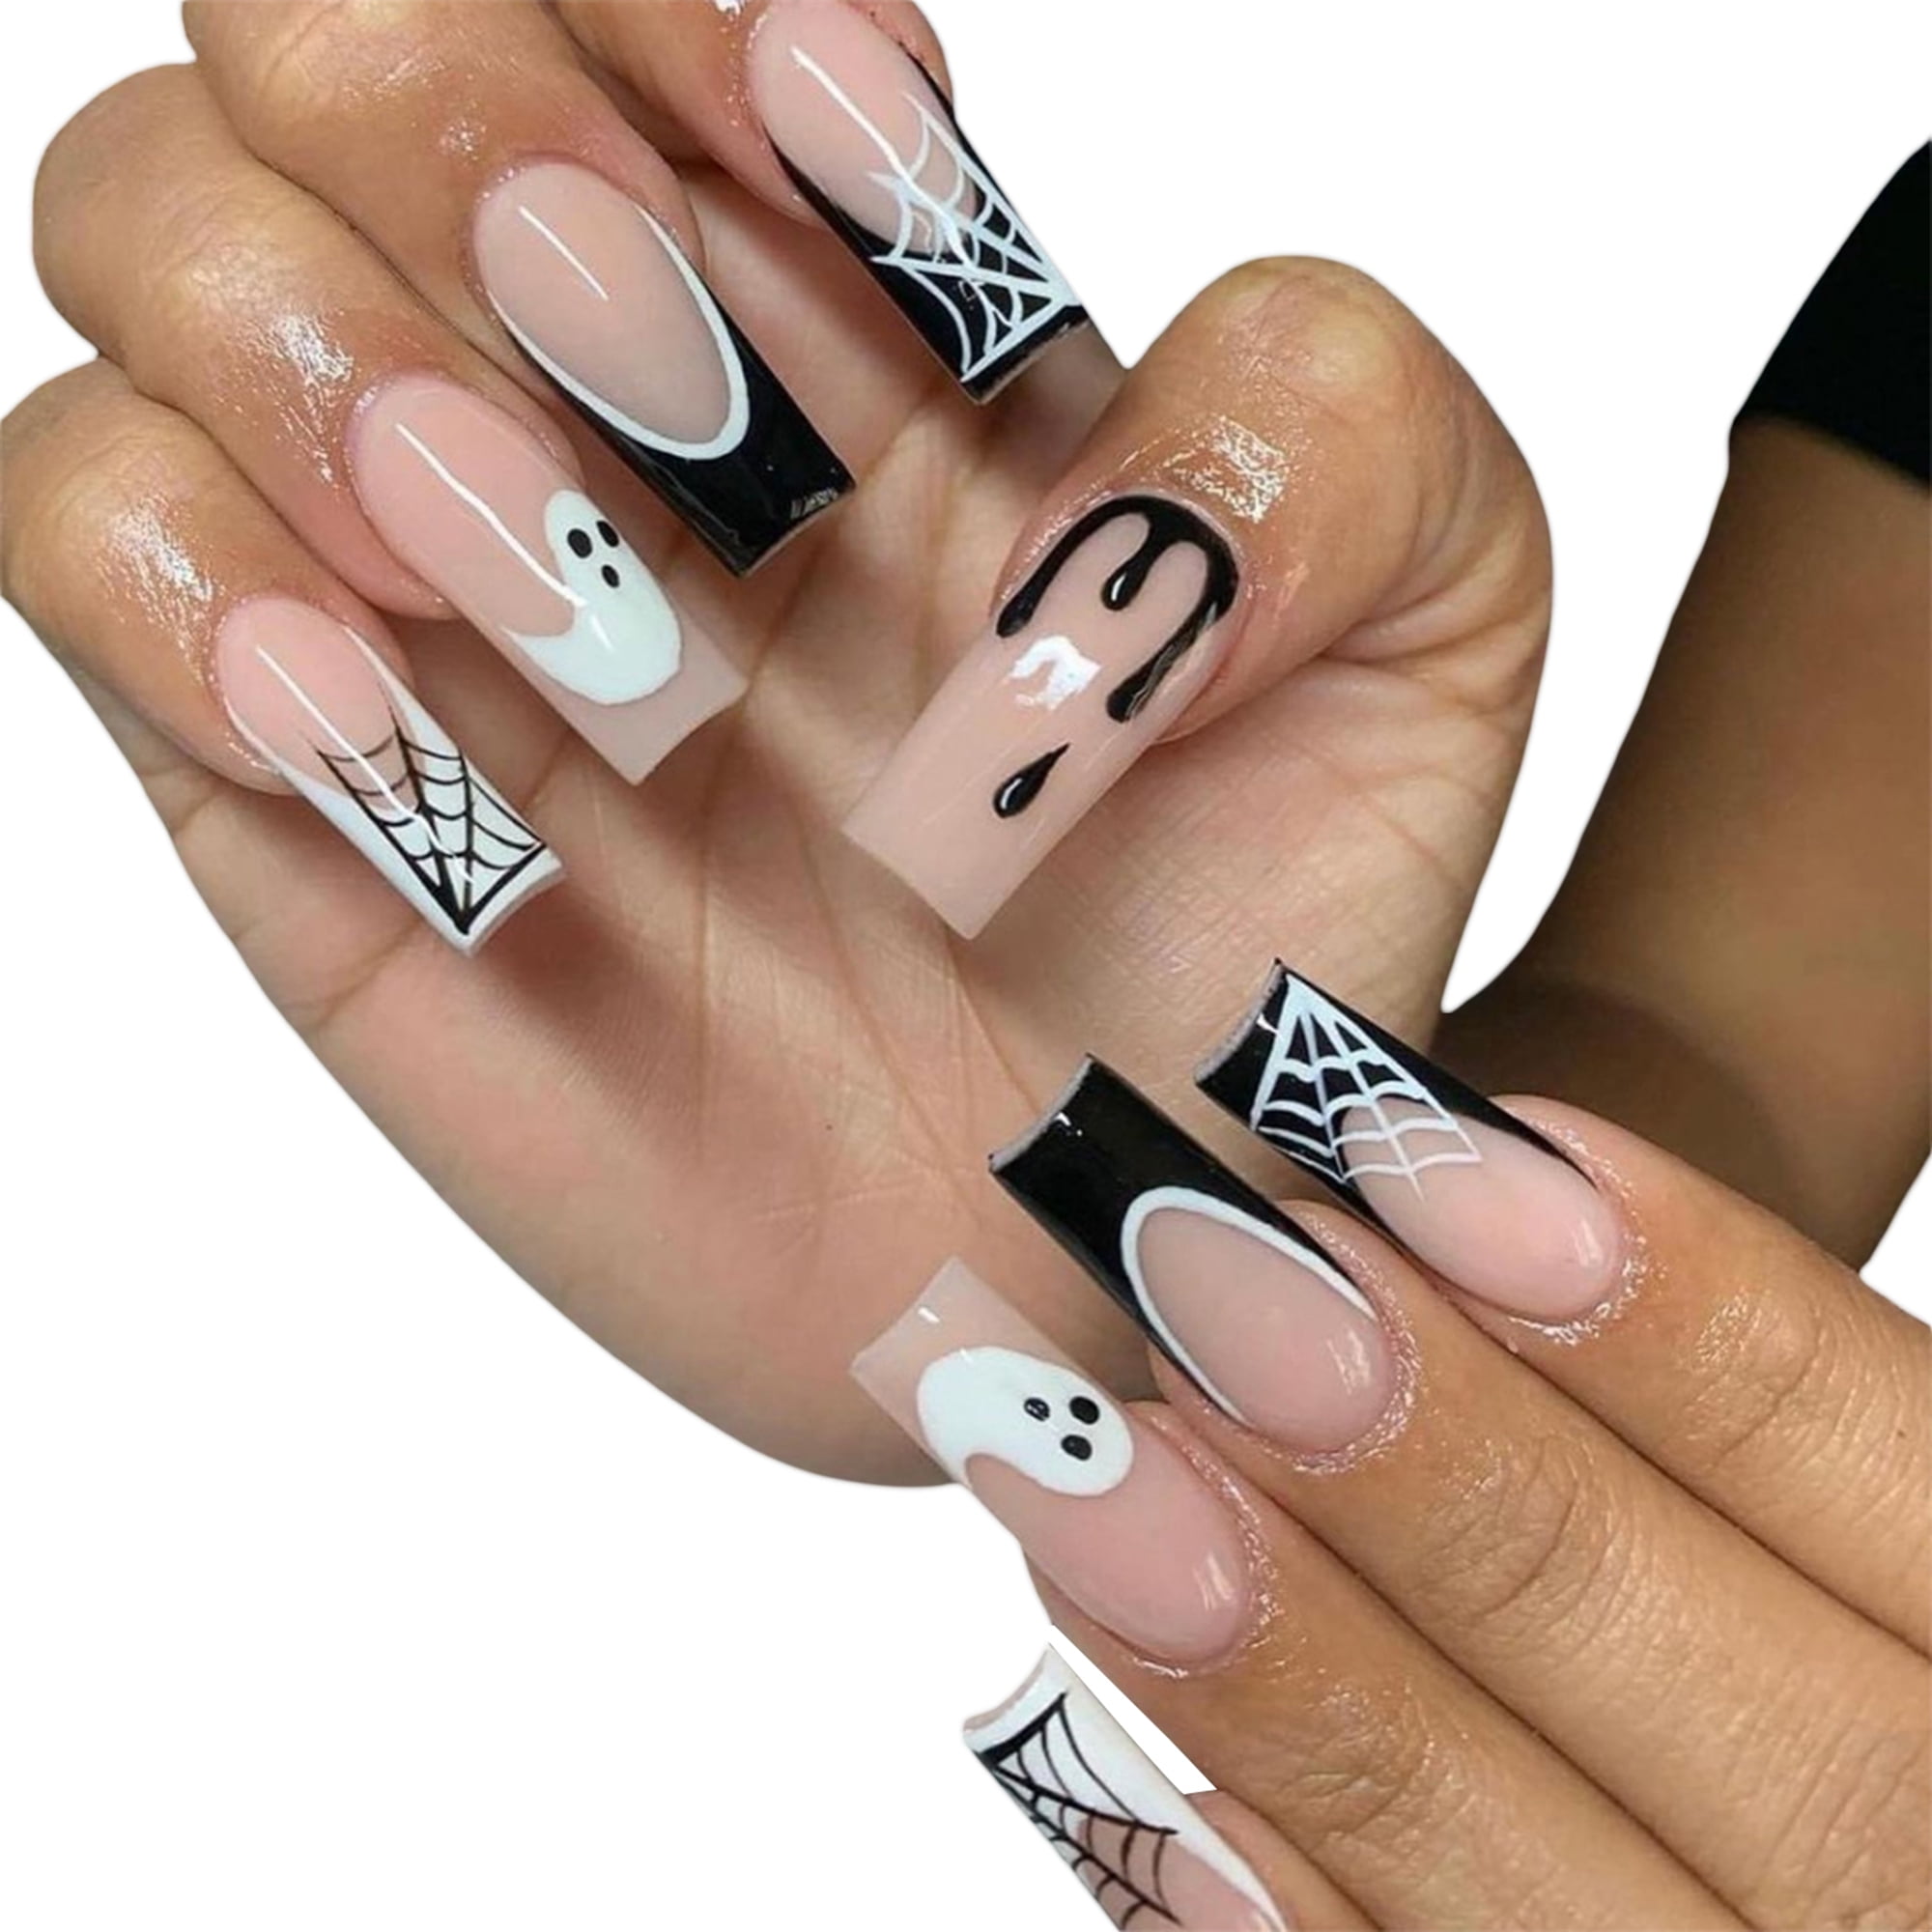 4 EASY Spiderweb Nail Art Designs for Halloween - YouTube